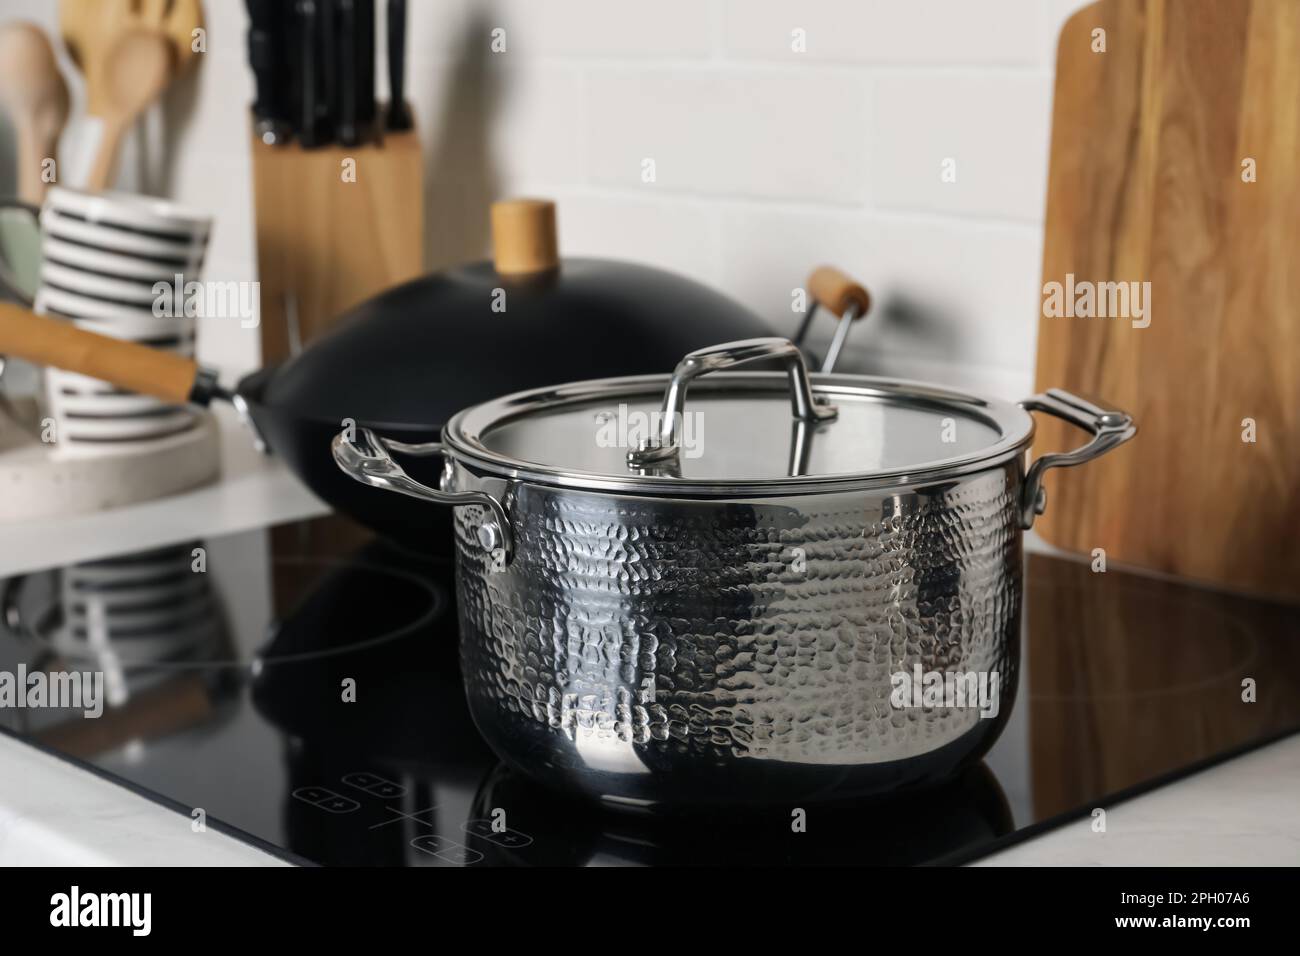 https://c8.alamy.com/comp/2PH07A6/metal-pot-and-wok-on-cooktop-in-kitchen-closeup-cooking-utensils-2PH07A6.jpg